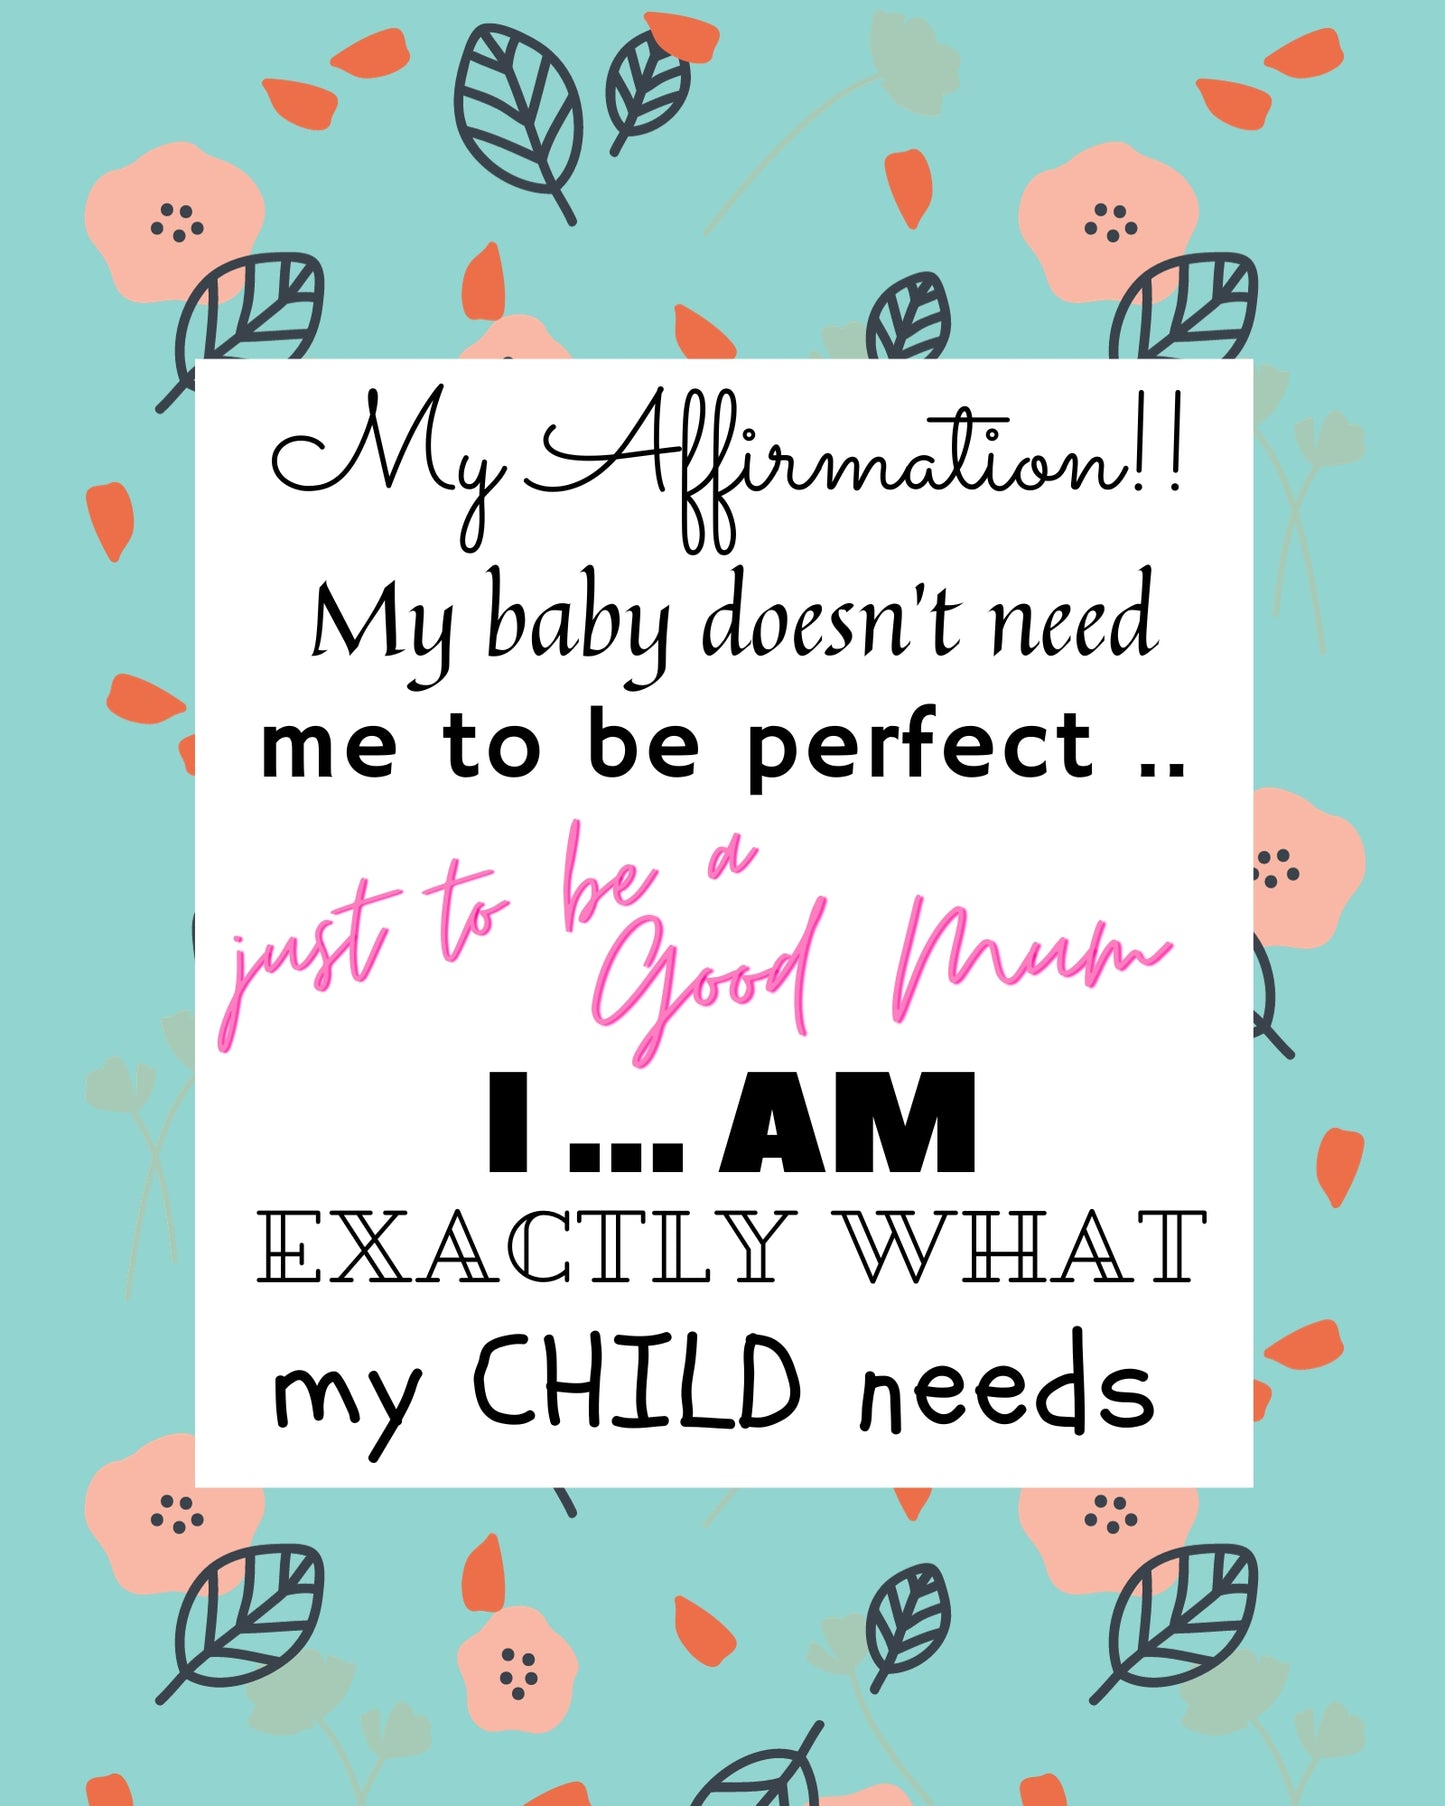 BEING A MOTHER AFFIRMATIONS BUNDLE - QUIRKY UNIQUE WALL ART featuring a positive affirmation about it being OK to be a good mother and not a great mother.